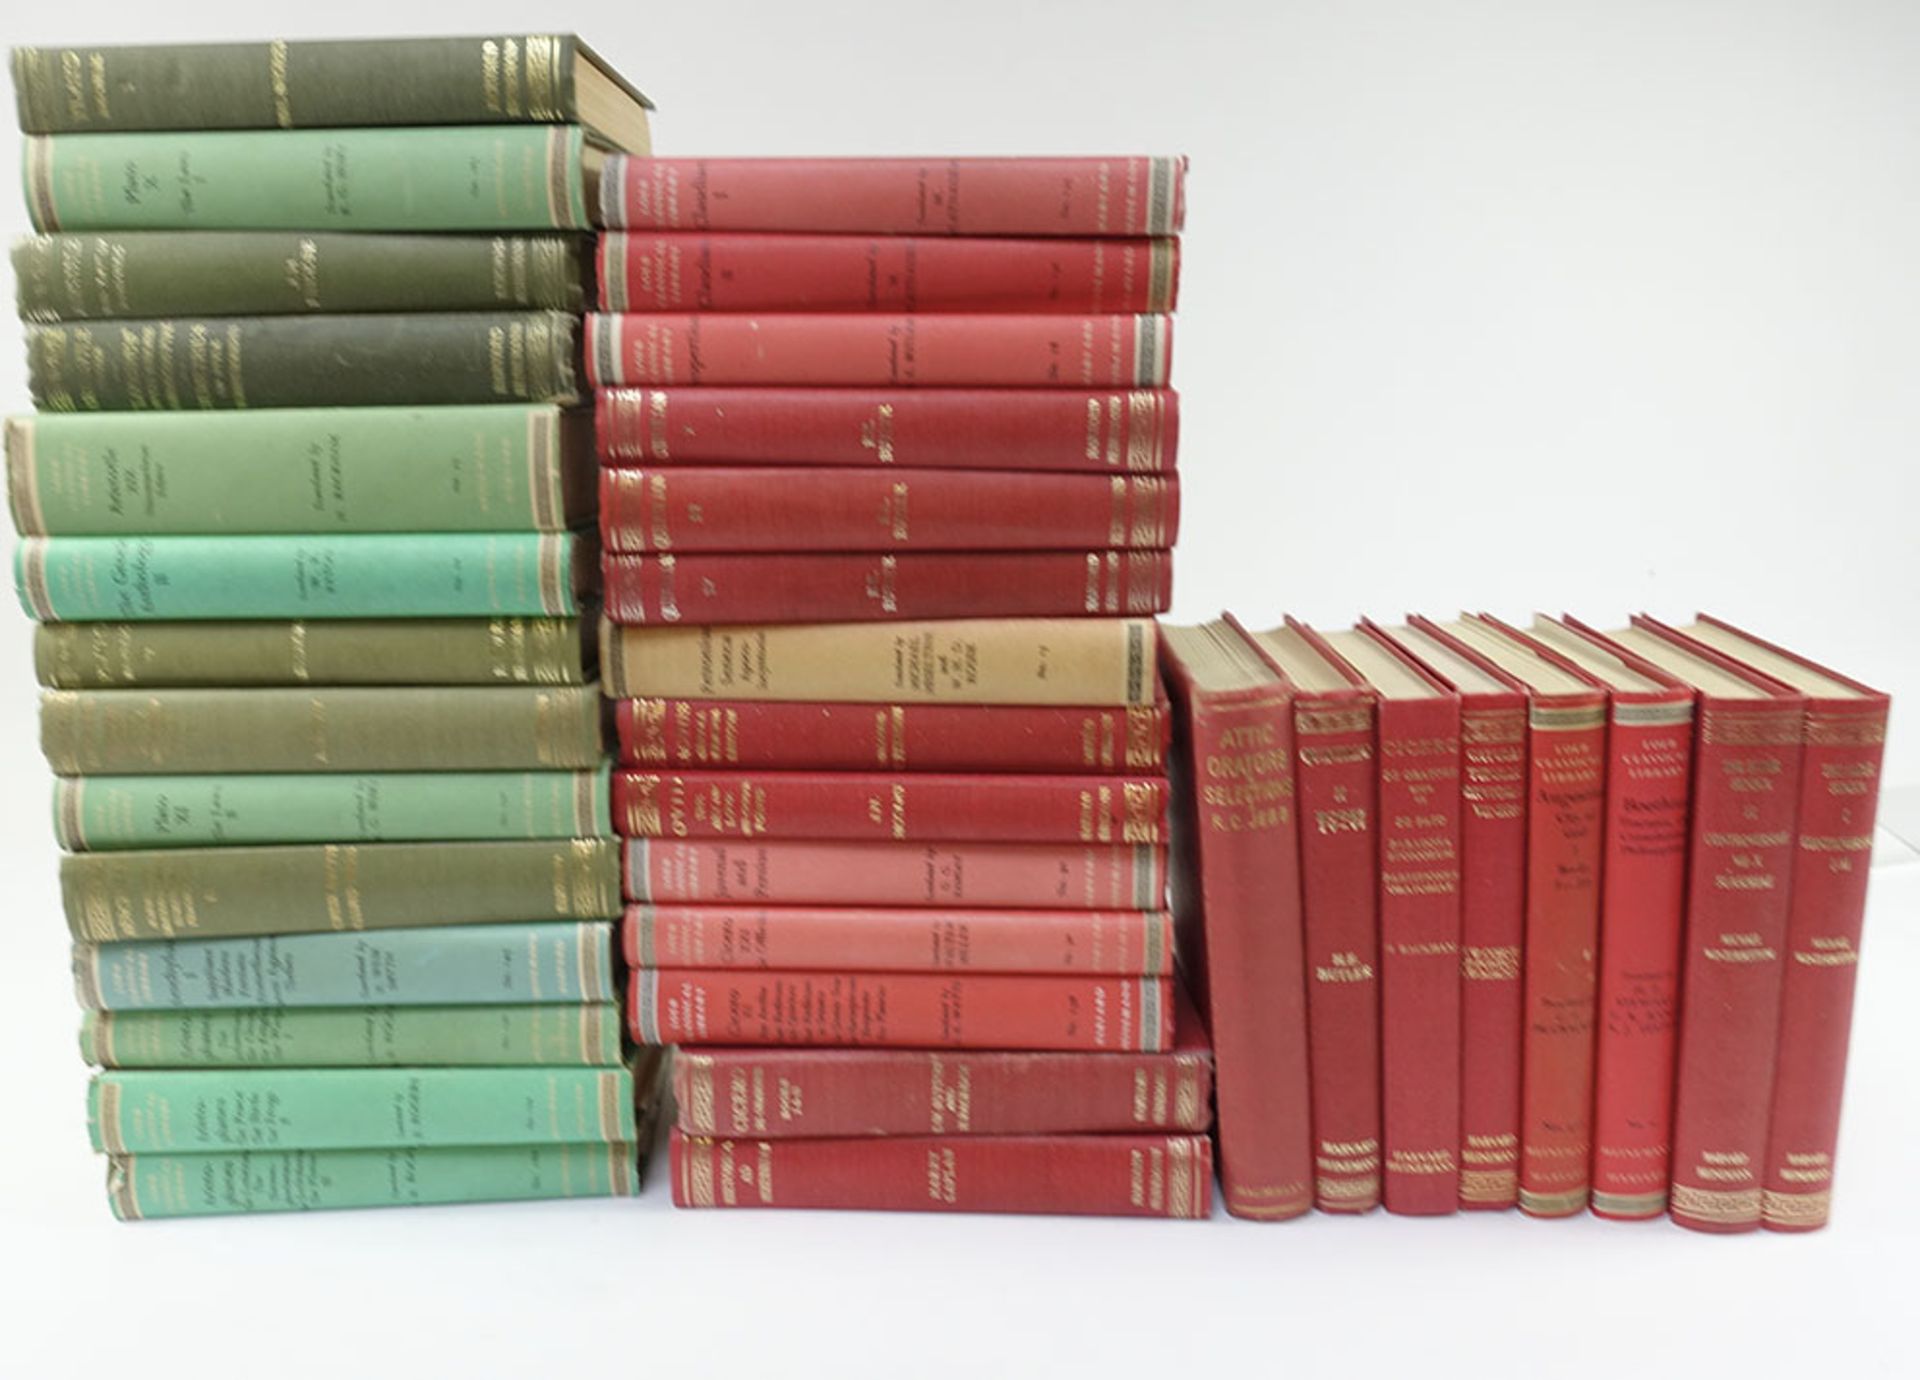 LOEB CLASSICAL LIBRARY. Greek (14) & Latin authors (22). Lond., (1962-79). 36 vols. of the series.